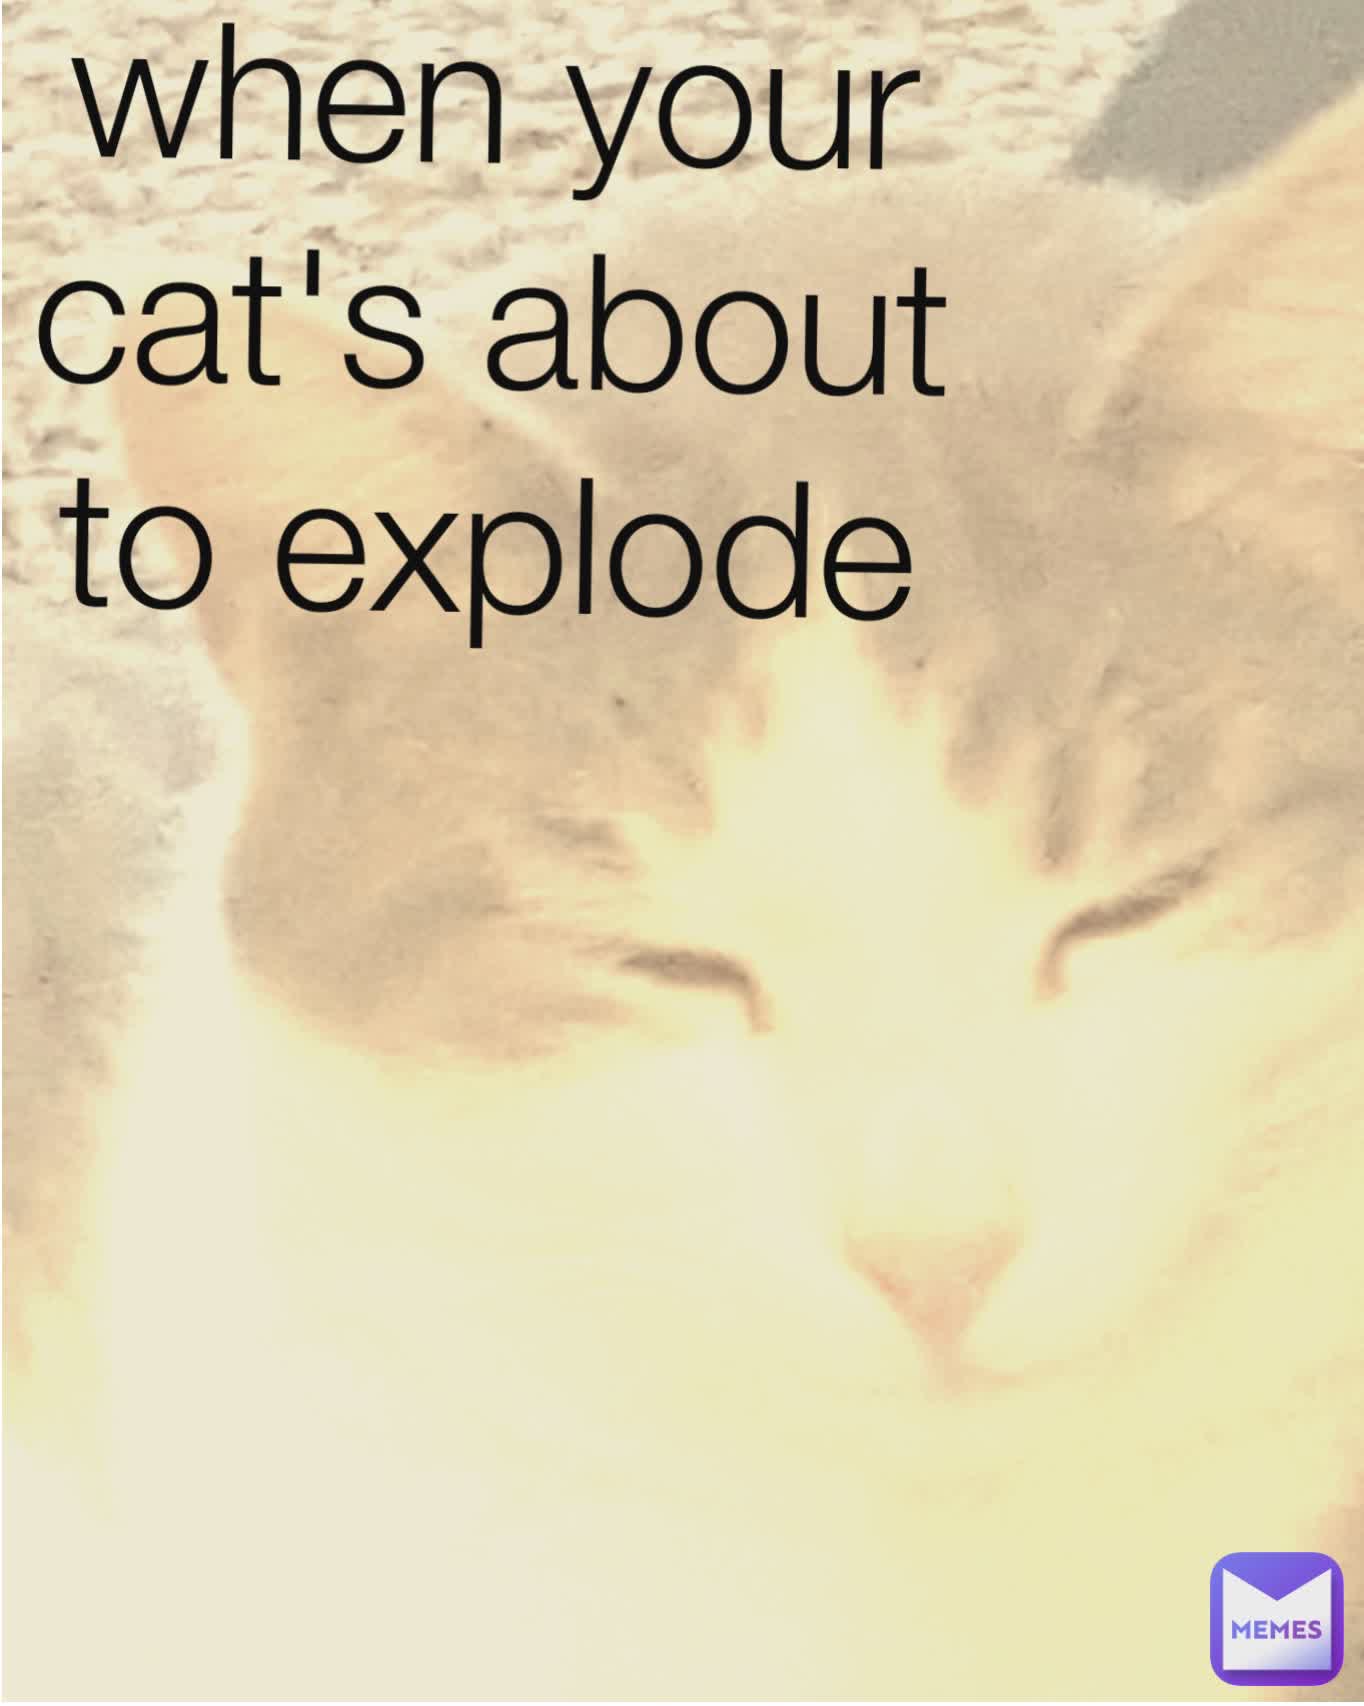 when your cat's about to explode